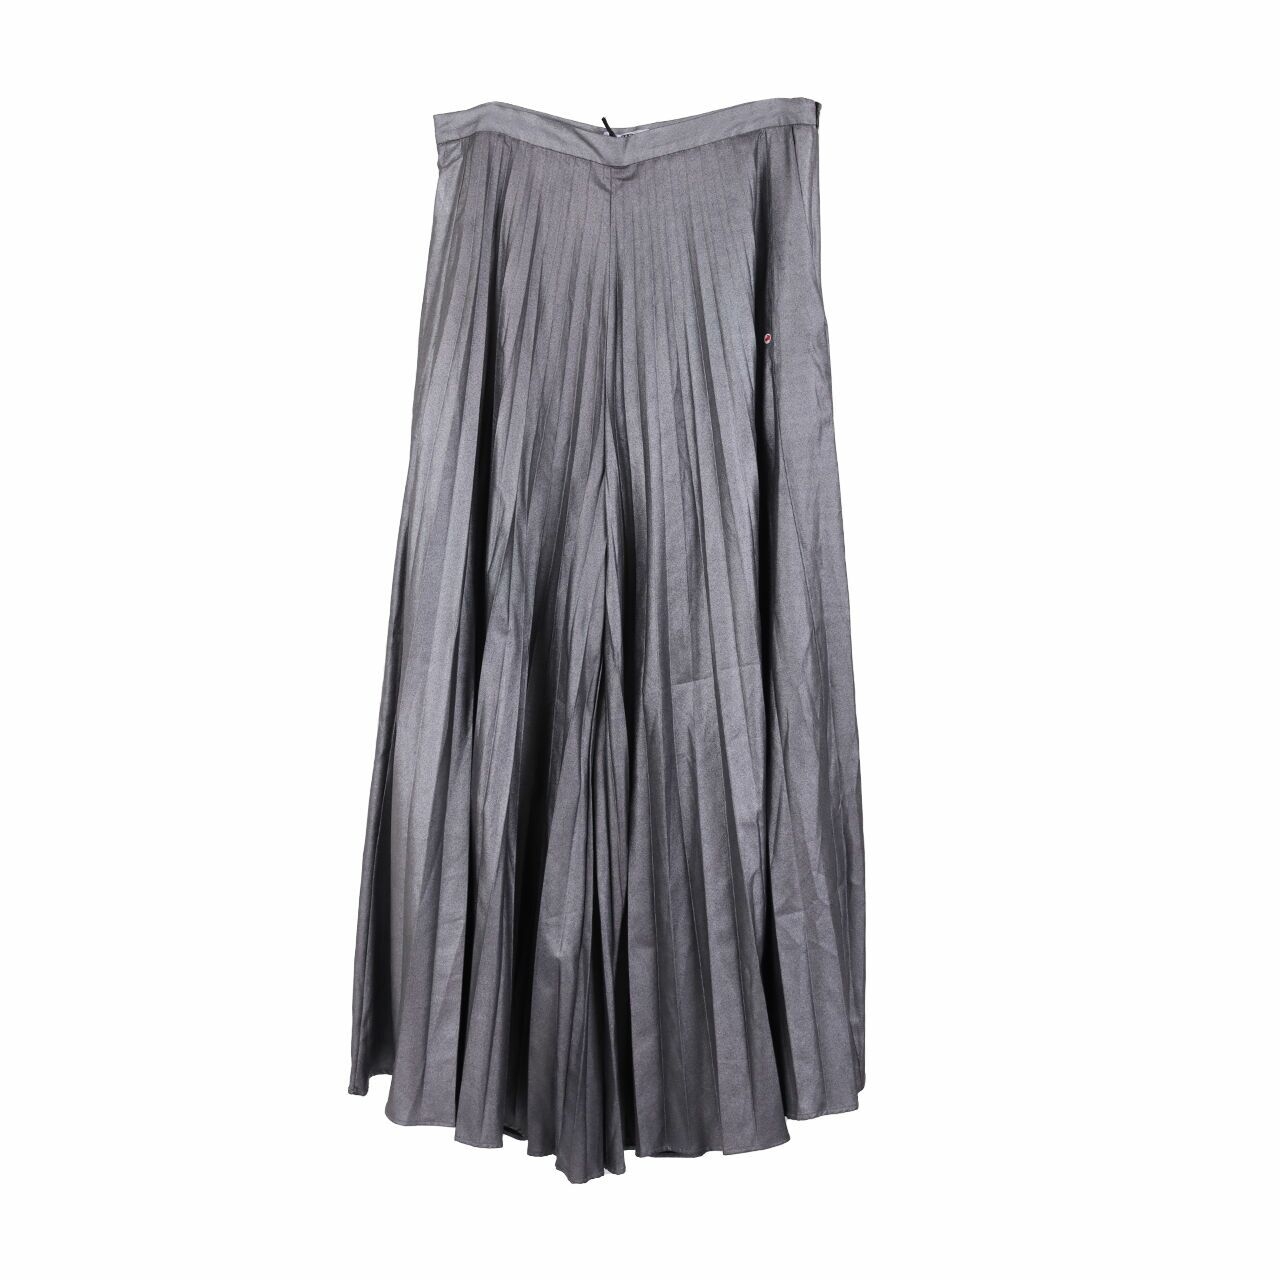 True Decadence Tall Silver Cullote Long Pants